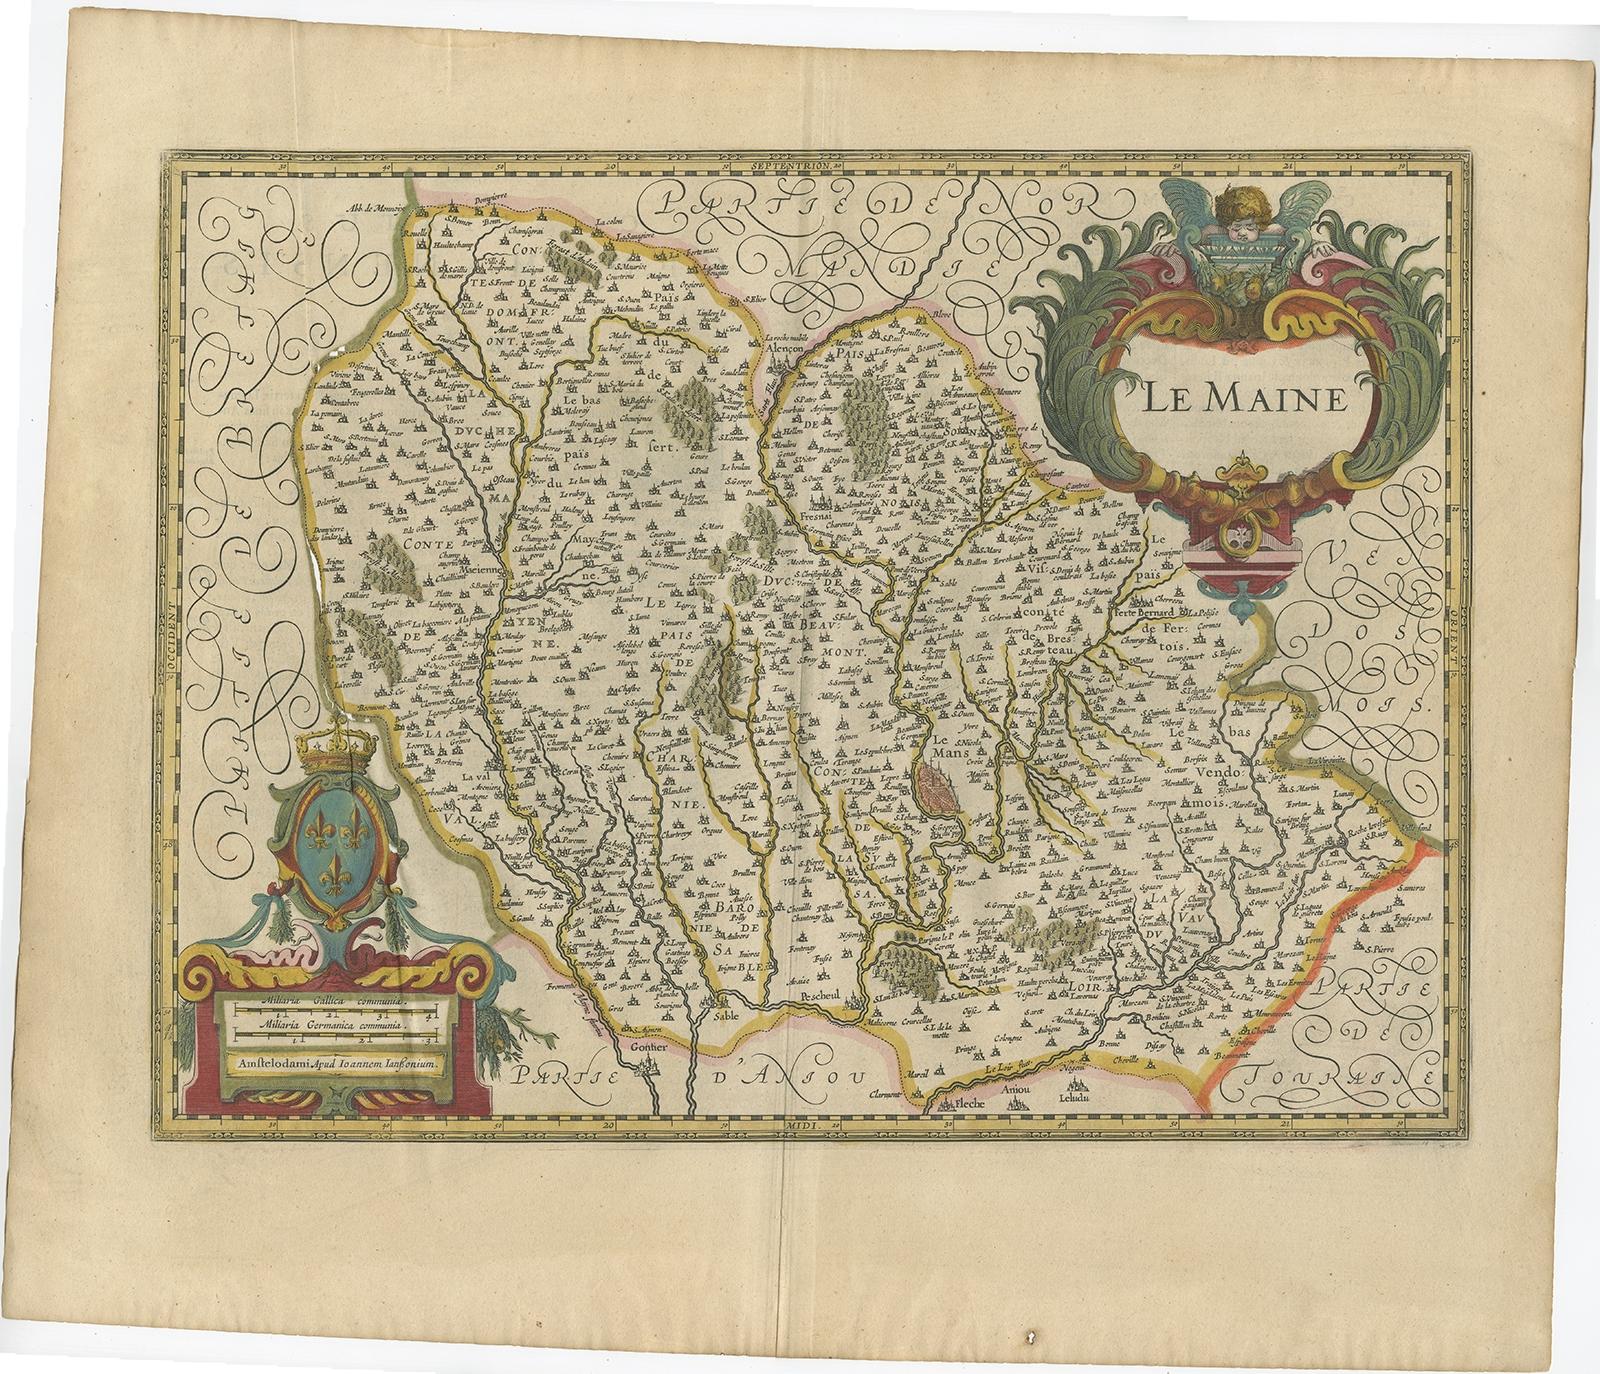 Antique map titled 'Le Maine'. 

Old map of the province of Maine, France. It shows the cities of Le Mans, Alencon and others. This map originates from a composite atlas. 

Artists and Engravers: Johannes Janssonius also known as Jan Jansson